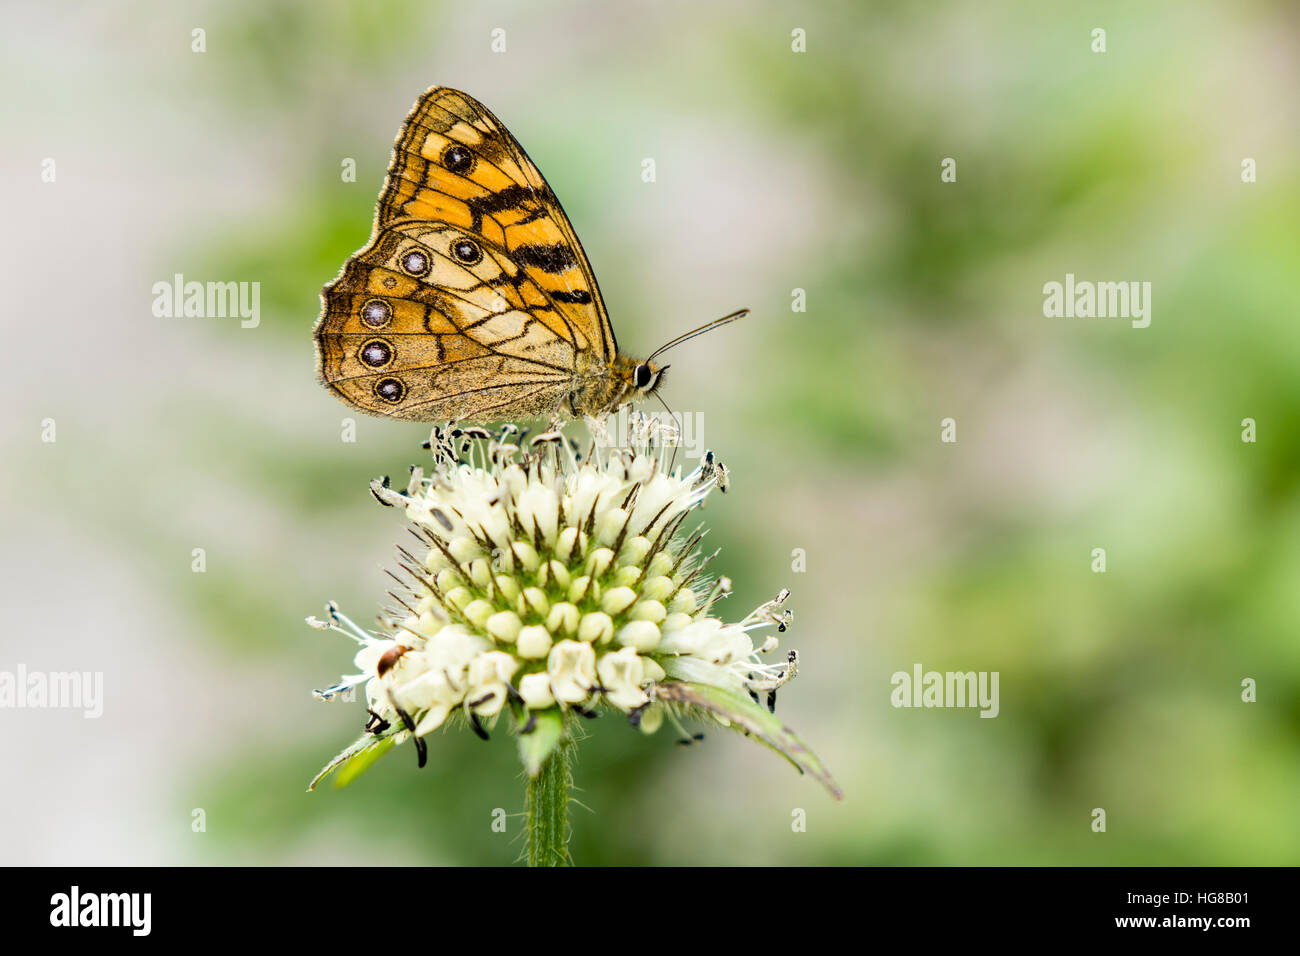 A yellow butterfly is siting on a white flower, Lower Pisang, Manang District, Nepal Stock Photo